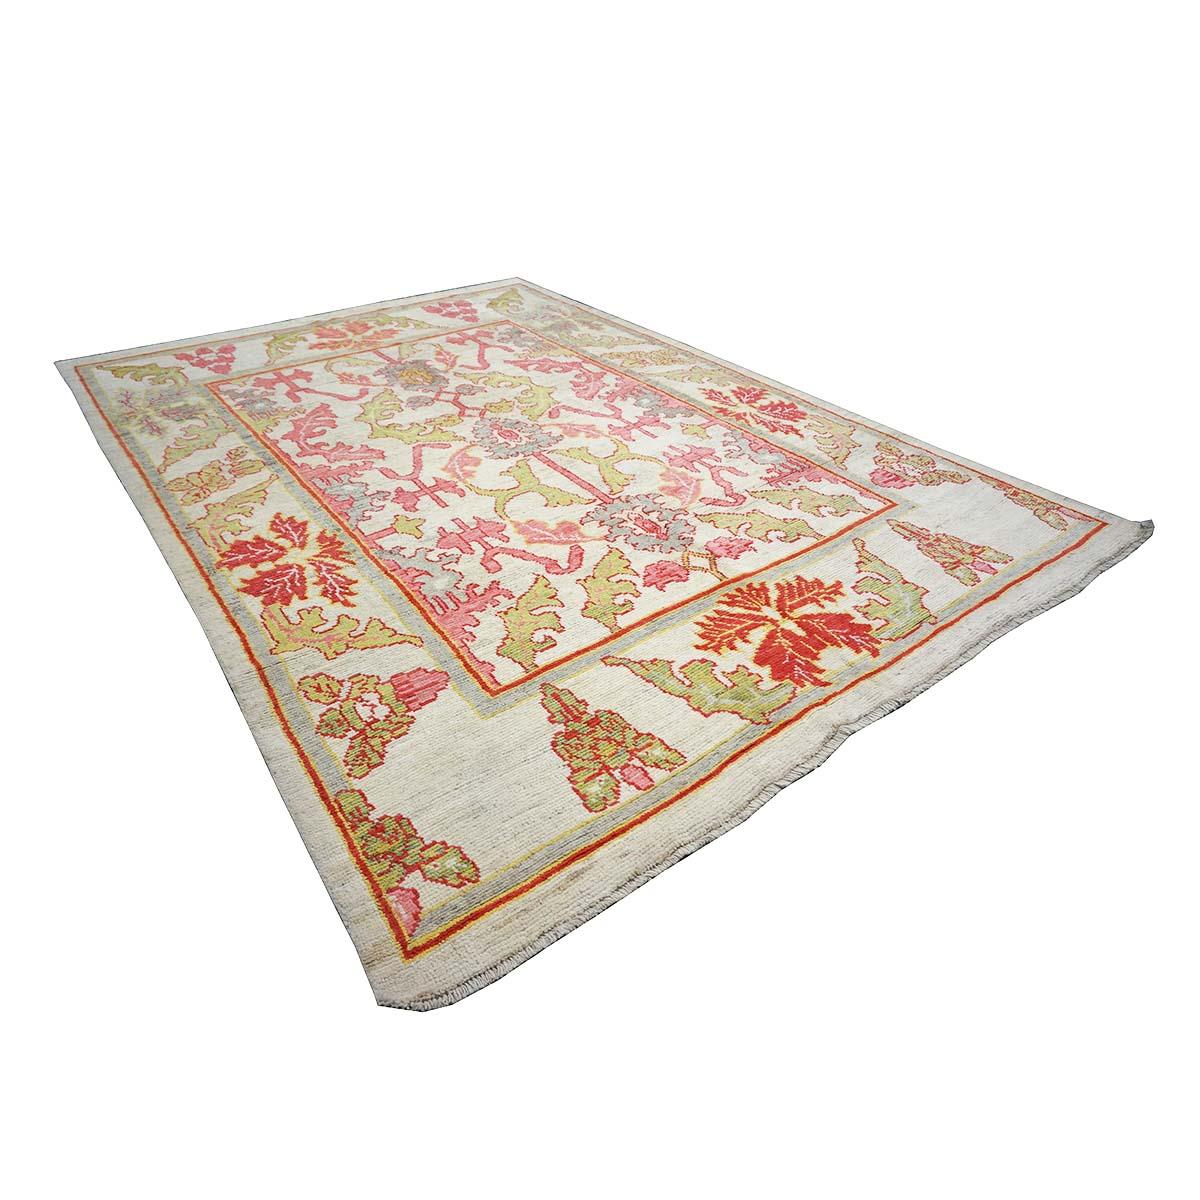 21st Century Persian Oushak Master 8x11 Ivory, Pink, & Yellow Handmade Area Rug In Excellent Condition For Sale In Houston, TX